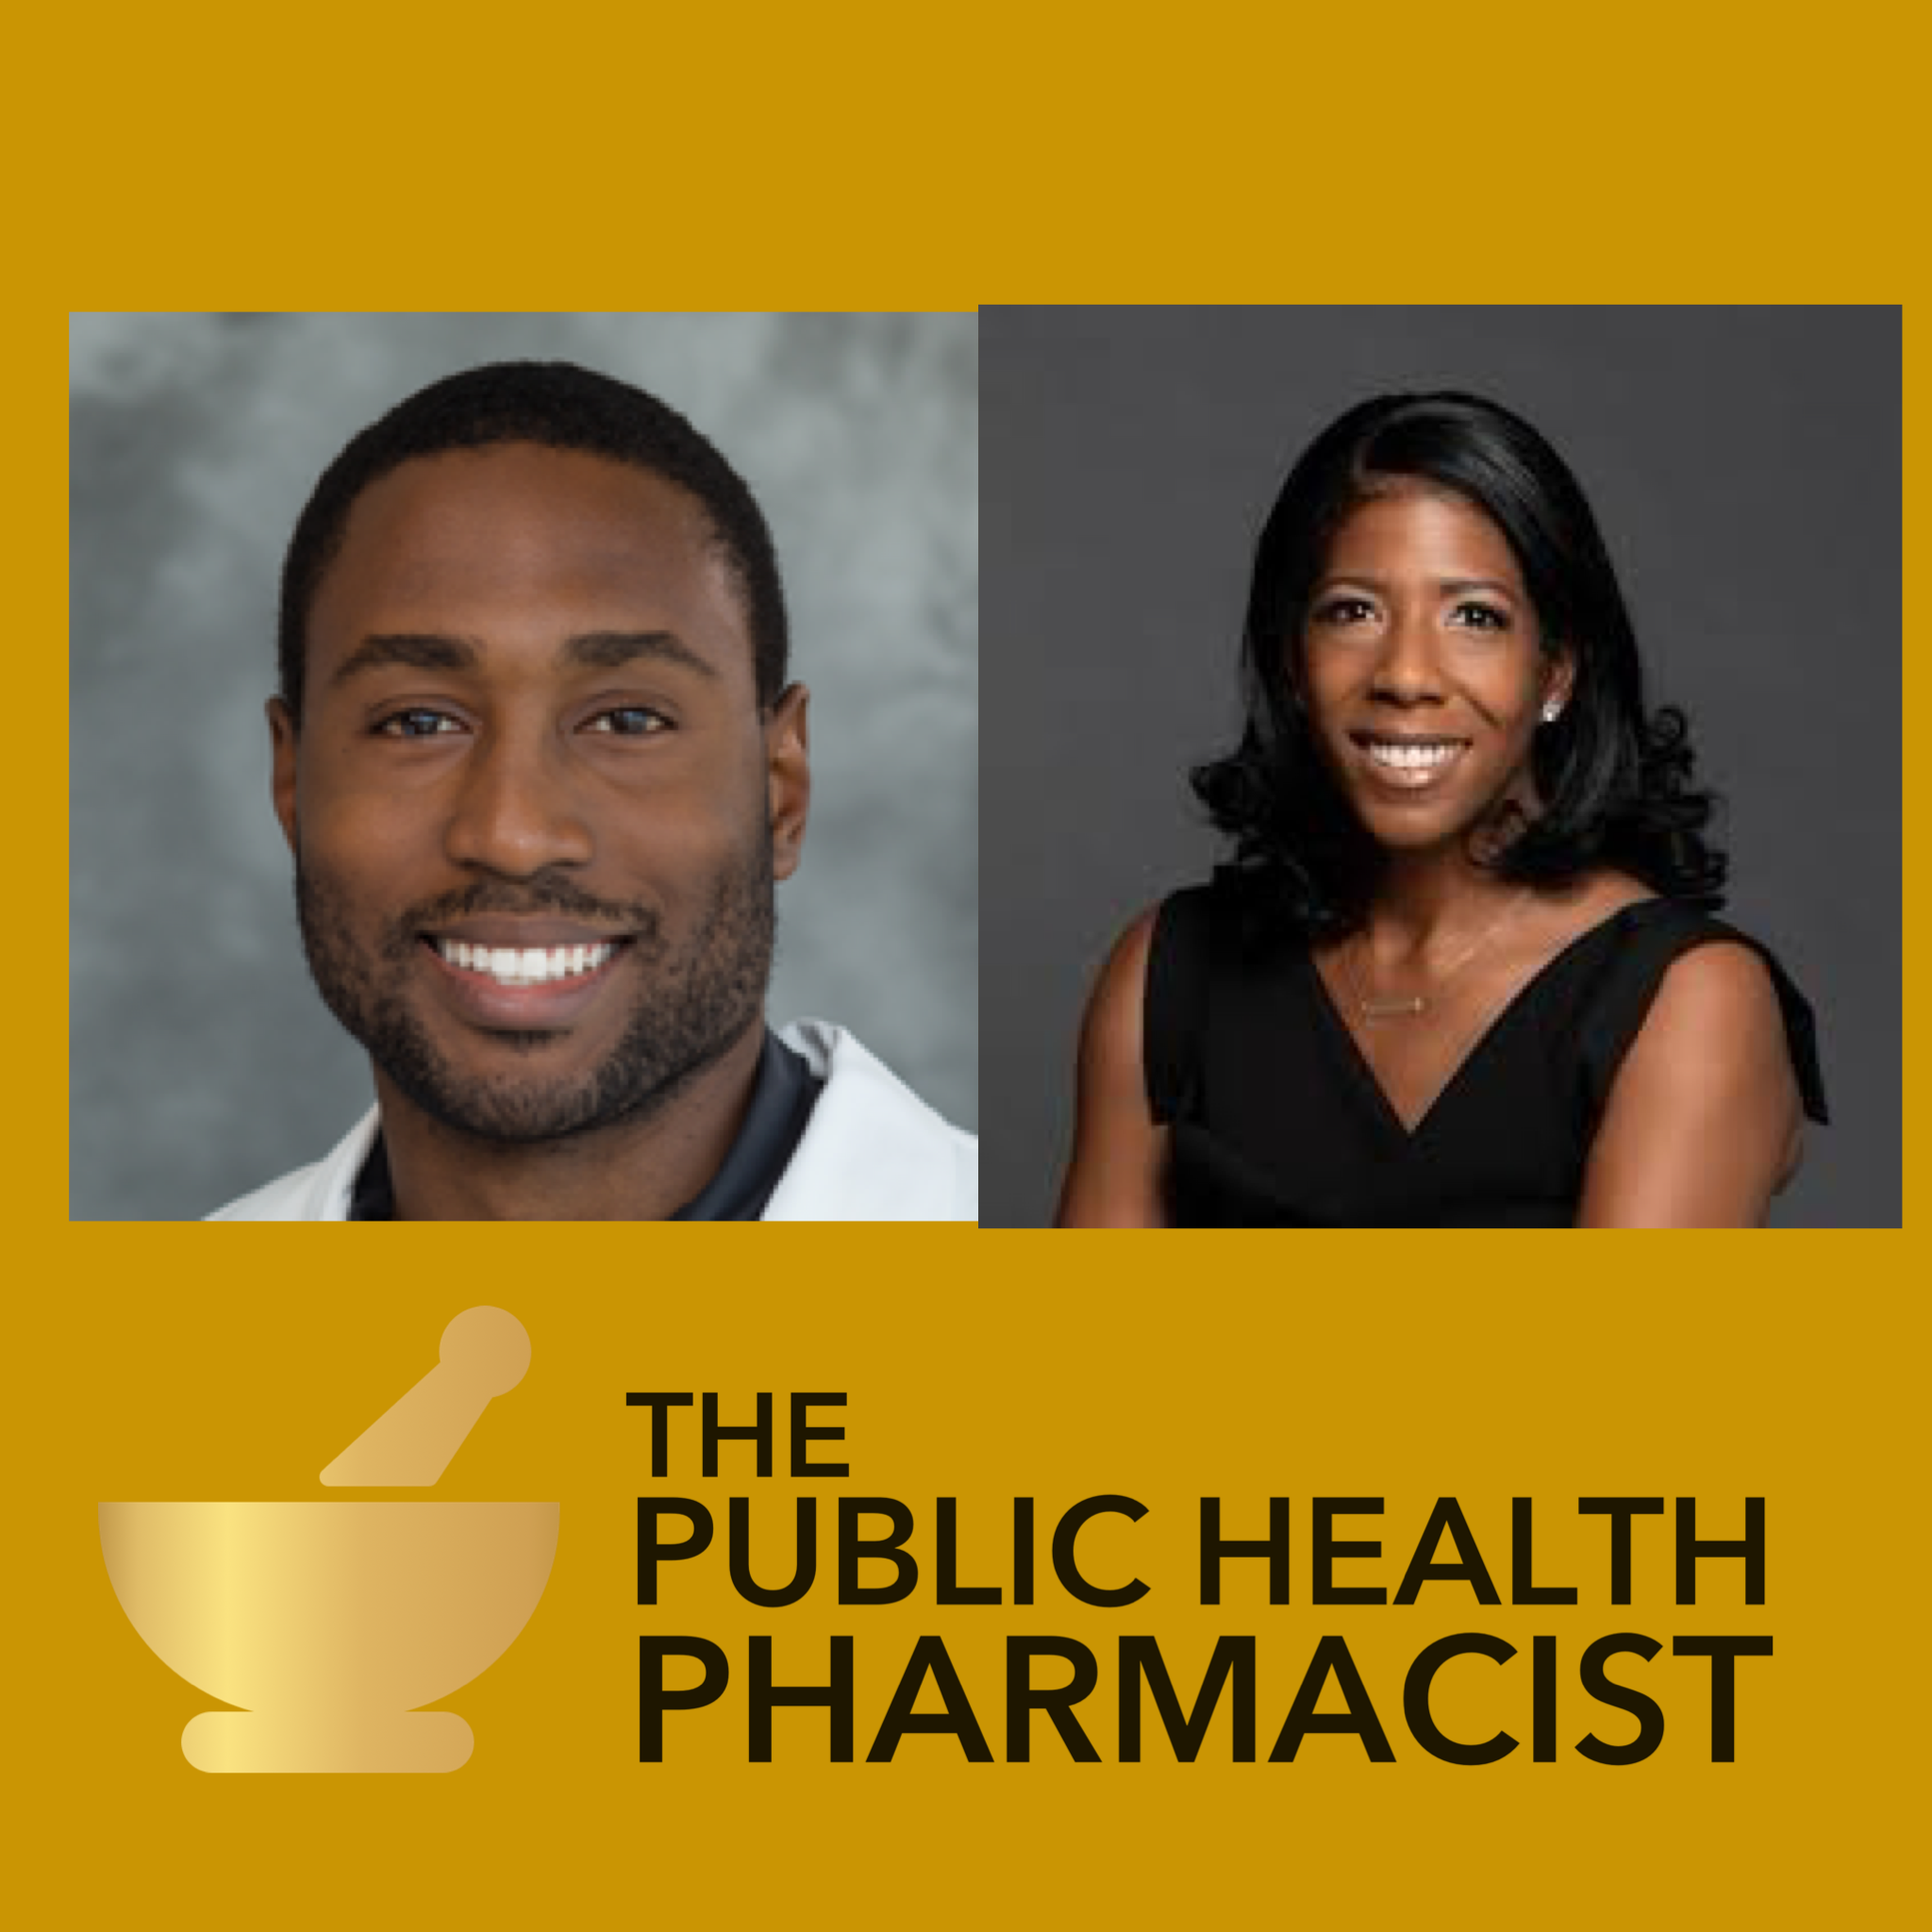 Holistic Medicine and Striving for Great Health - Why it's so Important to Treat the "Whole" Patient | The Public Health Pharmacist